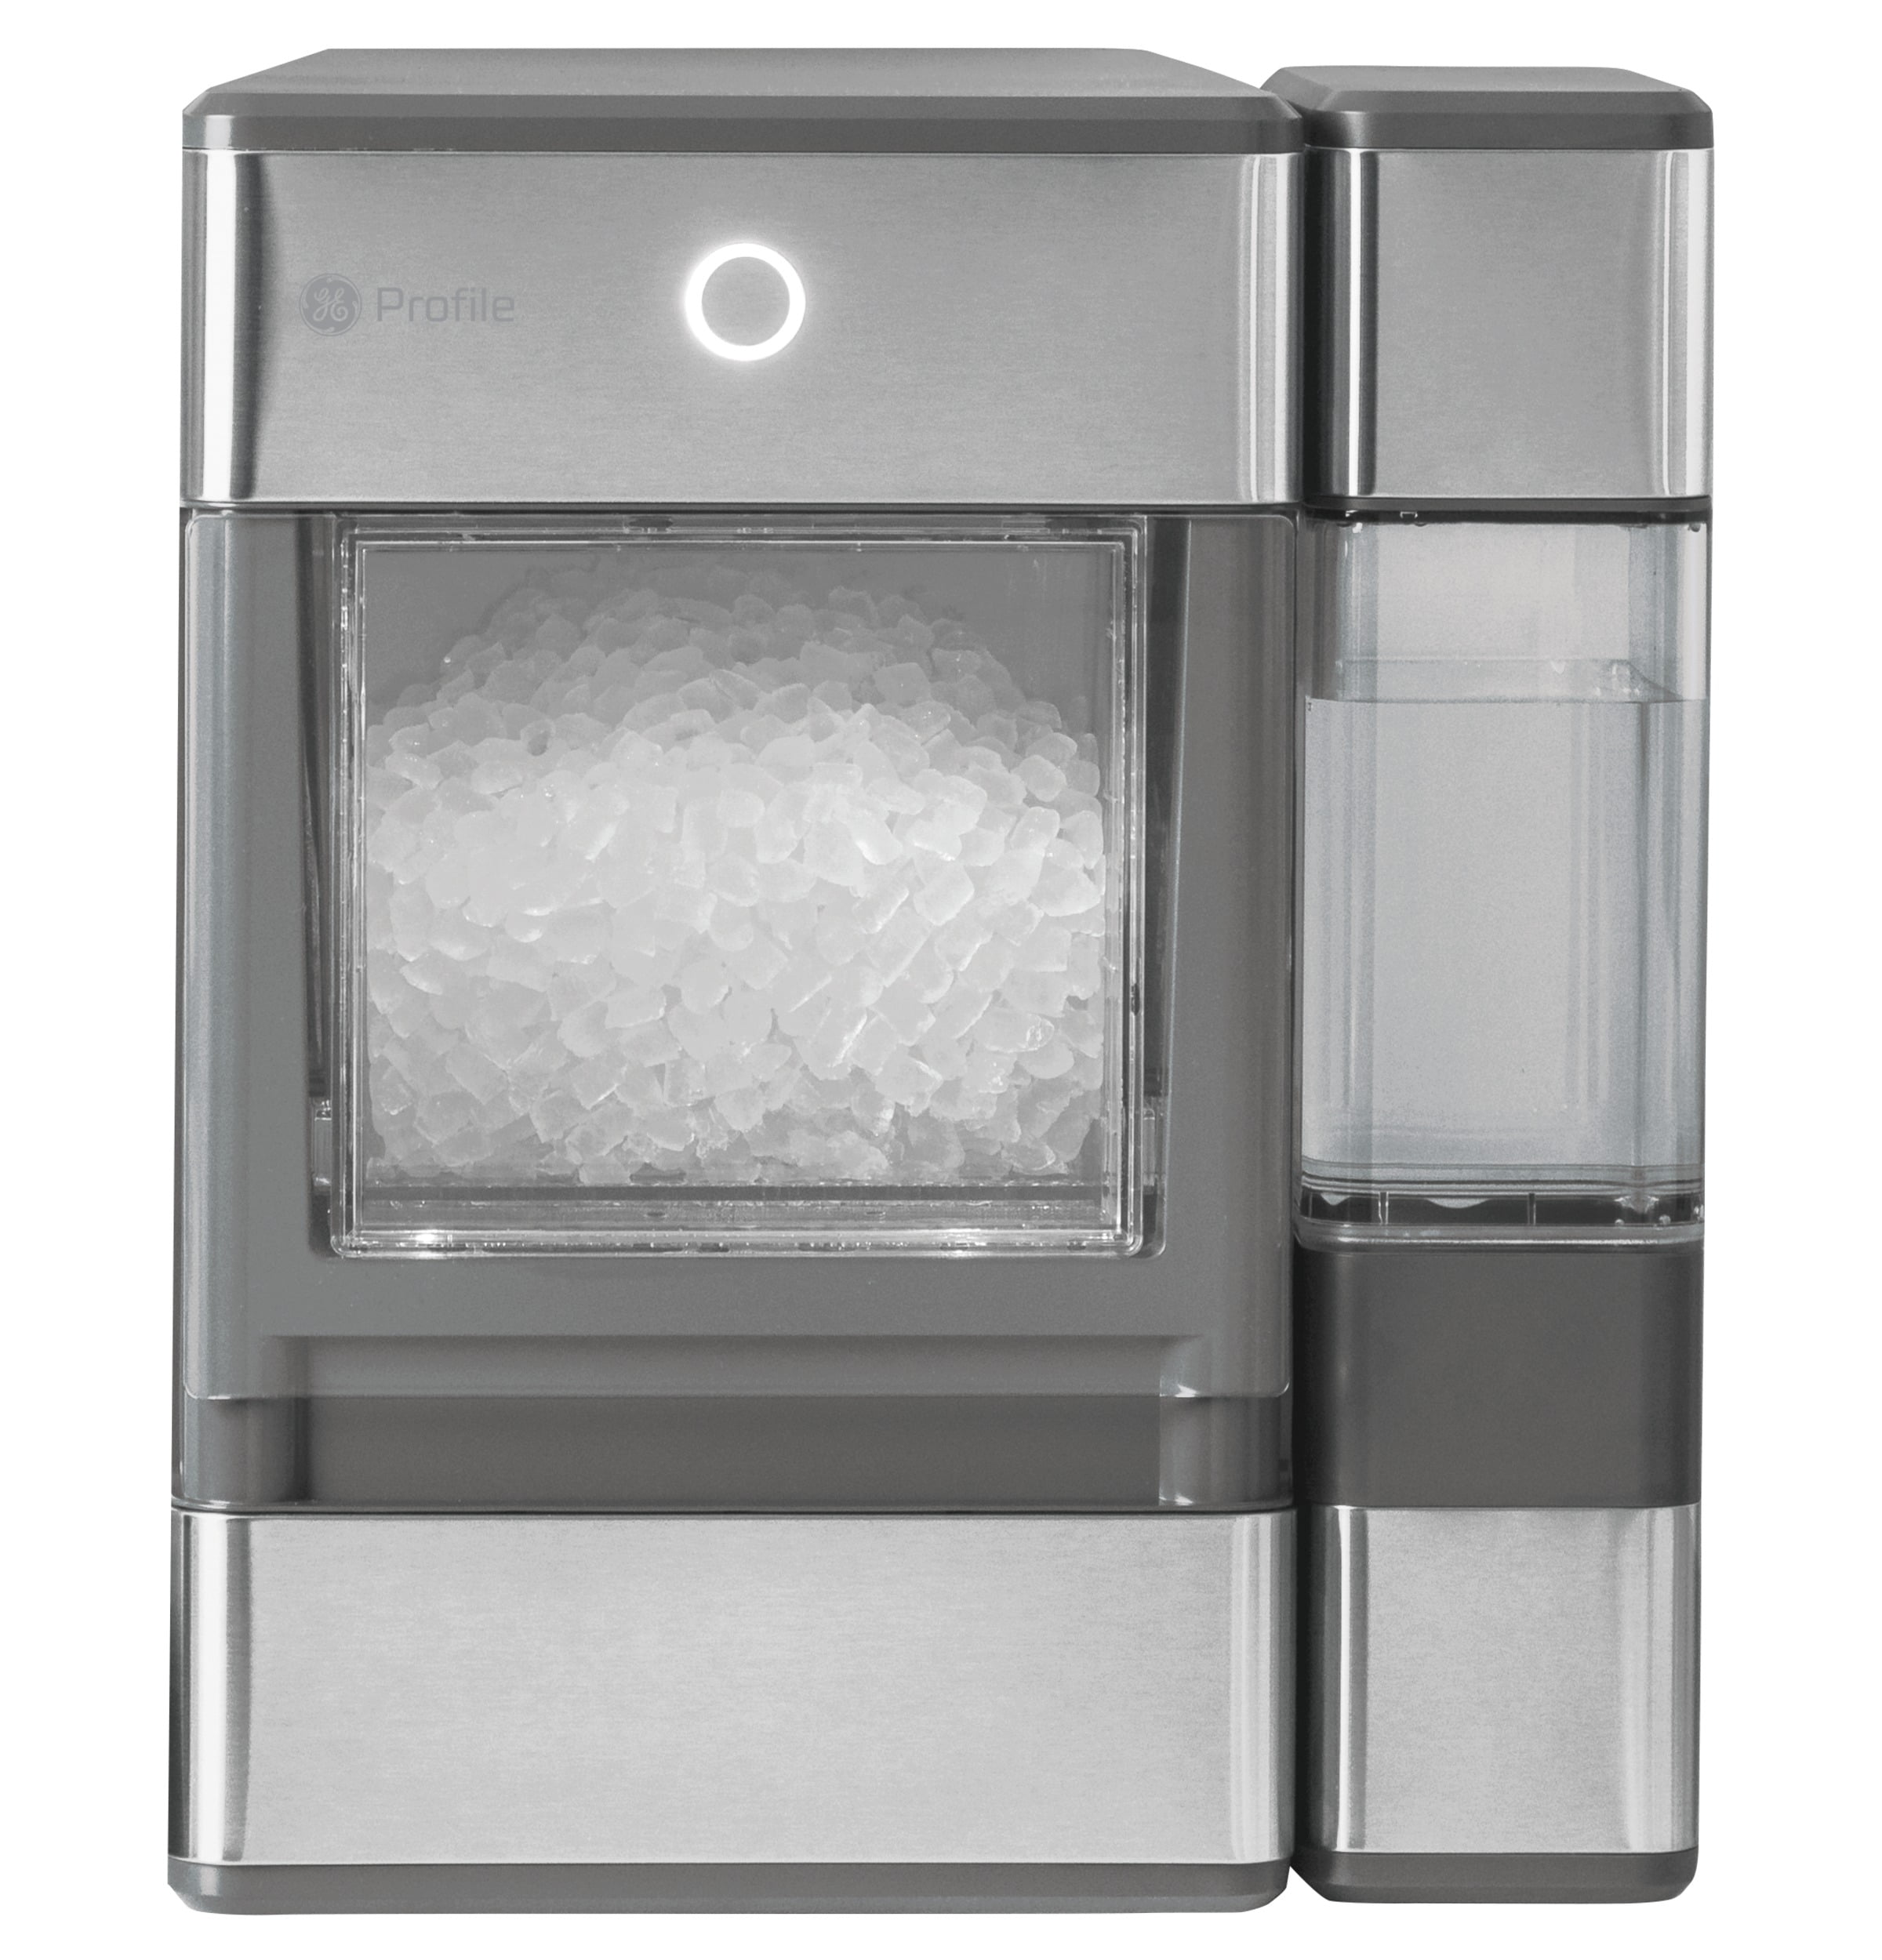 COWSAR Nugget Ice Maker Countertop Chewable Pebble Ice 34Lbs Per Day  Crunchy Pellet Ice Cubes Maker Machine with Self Cleaning Compact Portable  Design for Home/Kitchen/Office Stainless Steel Black Auction